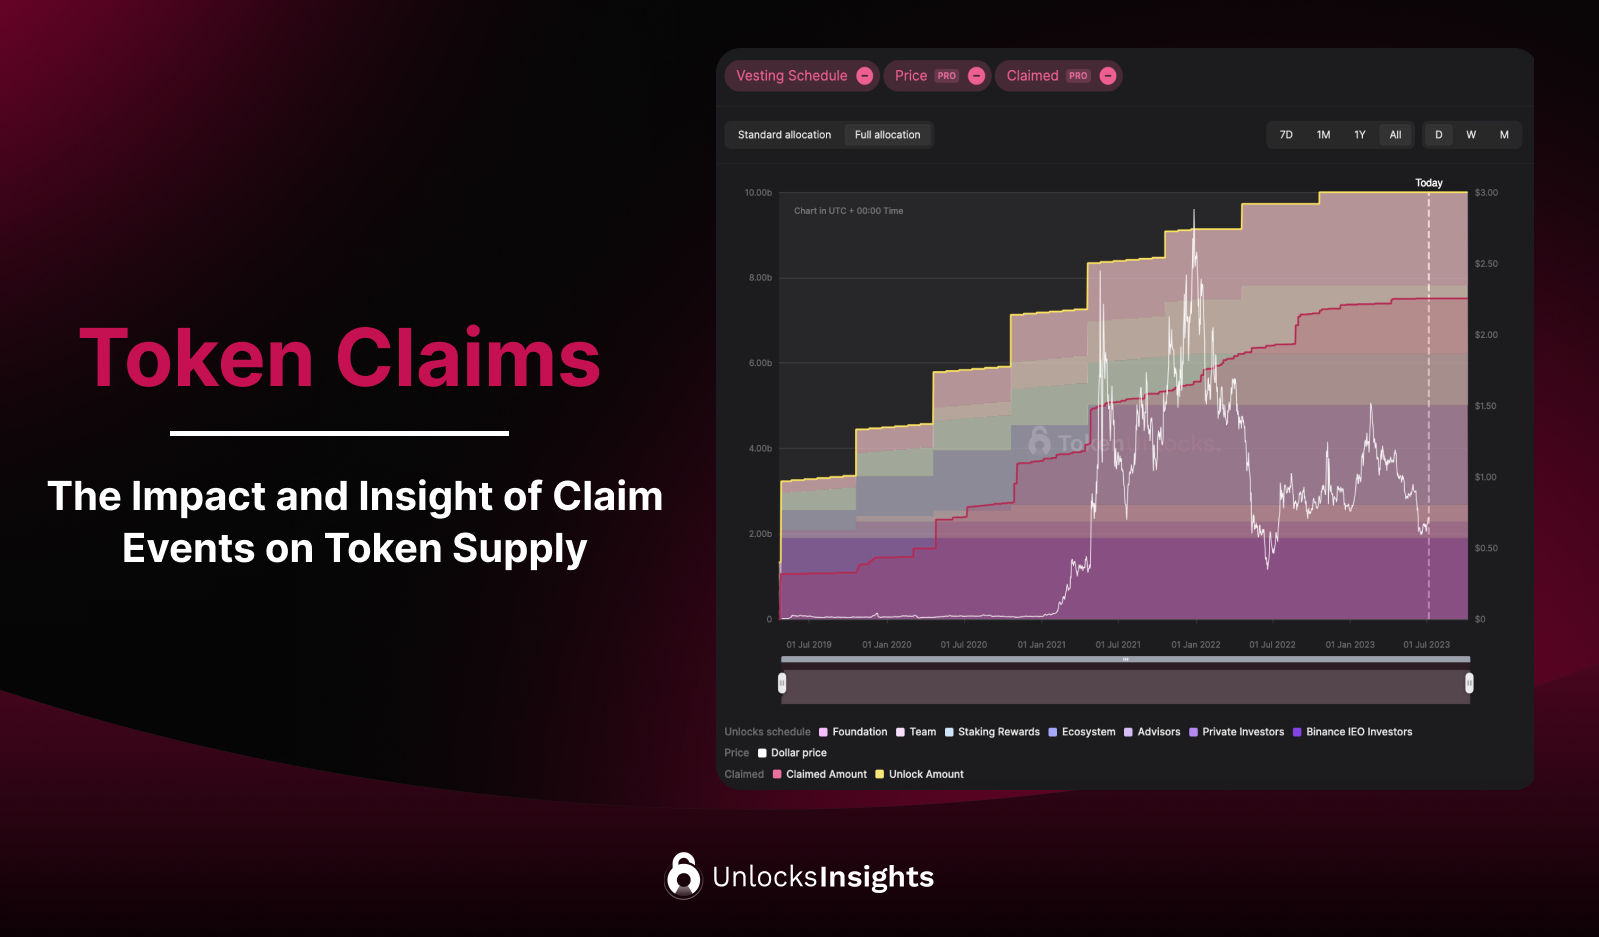 Understand the impact of Unlocks and Claims